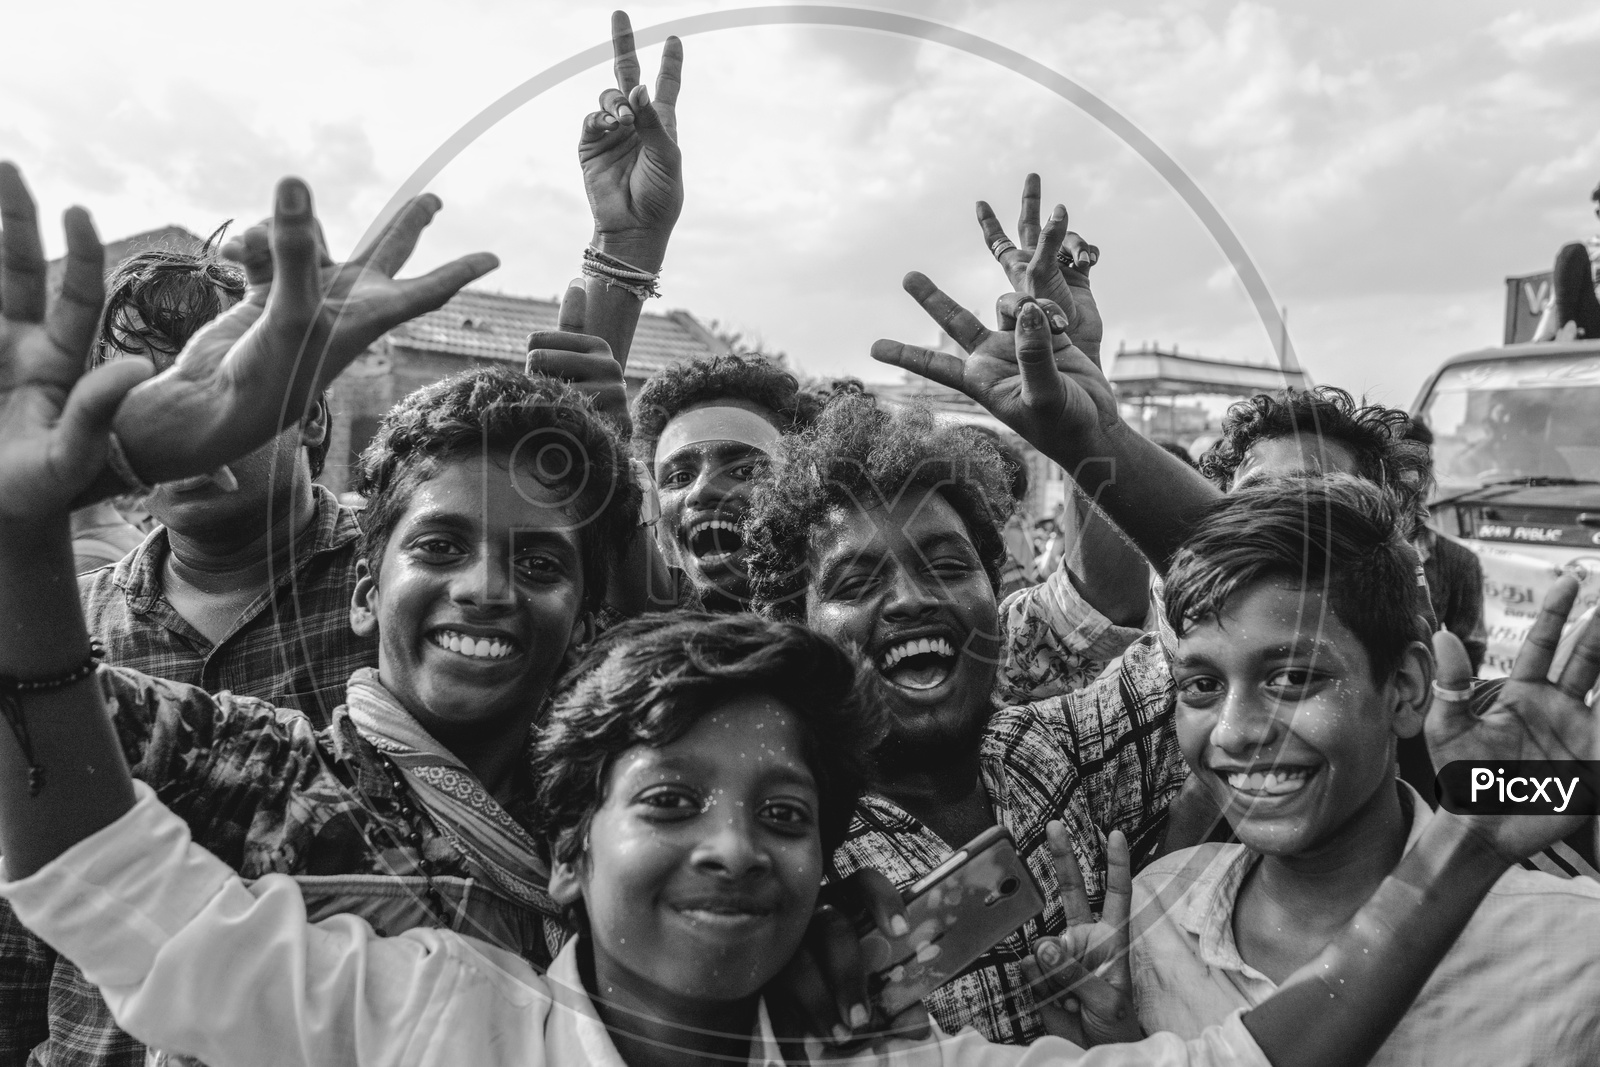 Monochrome picture of people posing for the camera at the lord ganesha nimarjan